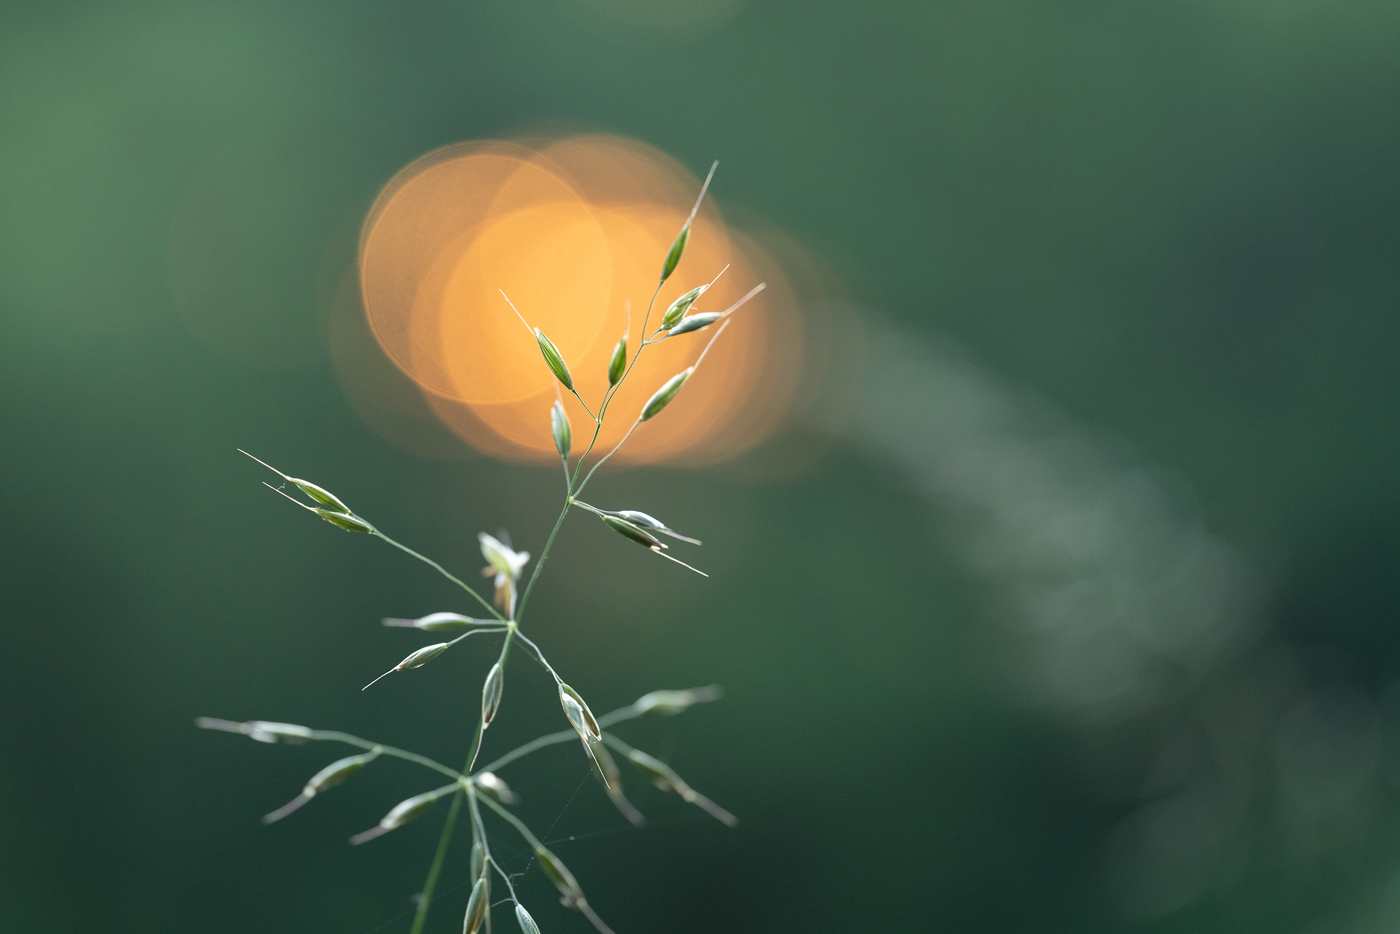 This is a serene close-up image of a slender plant in soft focus against a backdrop of gentle green hues. A warm, glowing orb from a rising sun, creates a bokeh effect, casting a magical atmosphere over the North Yorkshire setting.